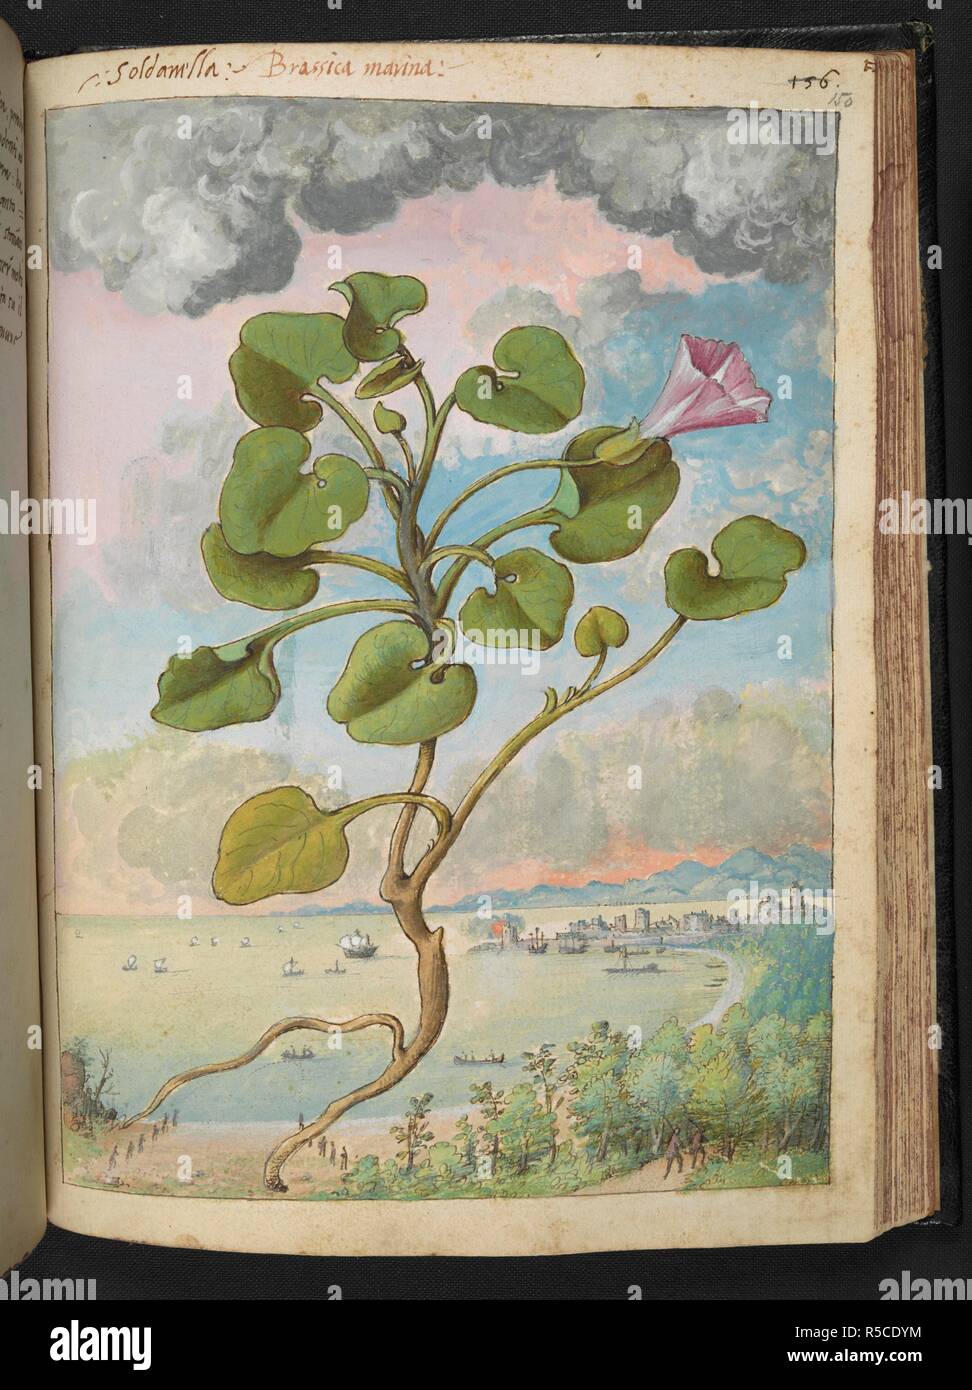 Full page botanical painting of Callystegia soldanella, labelled 'Soldanella Brassica marina' (Convolvulus or Coastal Bindweed) with men carrying rods and a beach, a port and sailing ships in the background. Coloured drawings of plants, copied from nature in the Roman States, by Gerardo Cibo. Vol. I. Pietro Andrea Mattioli, Physician, of Siena: Extracts from his edition of Dioscorides' 'de re Medica':. Italy, c. 1564-1584. Source: Add. 22332 f.150. Language: Italian. Author: Cibo, Gheraldo. Stock Photo